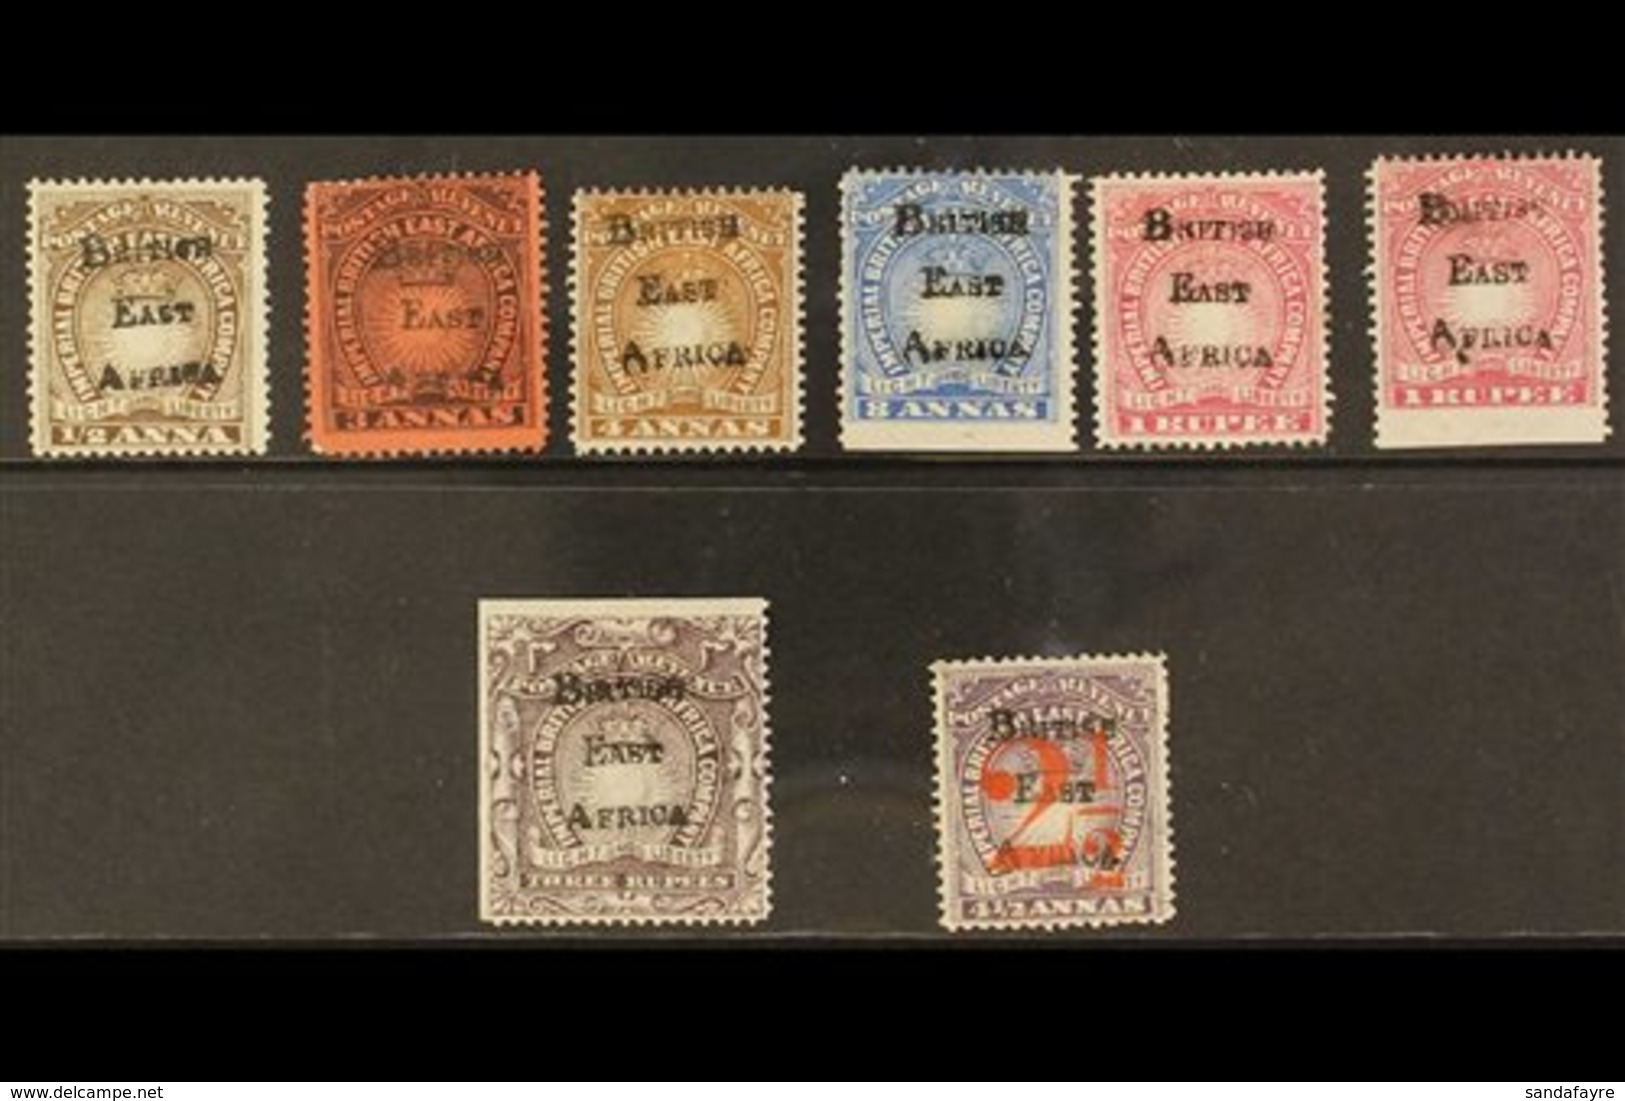 1895 "BRITISH EAST AFRICA" HANDSTAMPS On "Light And Liberty" Types Of 1890, A Useful Mint Or Unused Group With ½a, 3a, 4 - Brits Oost-Afrika